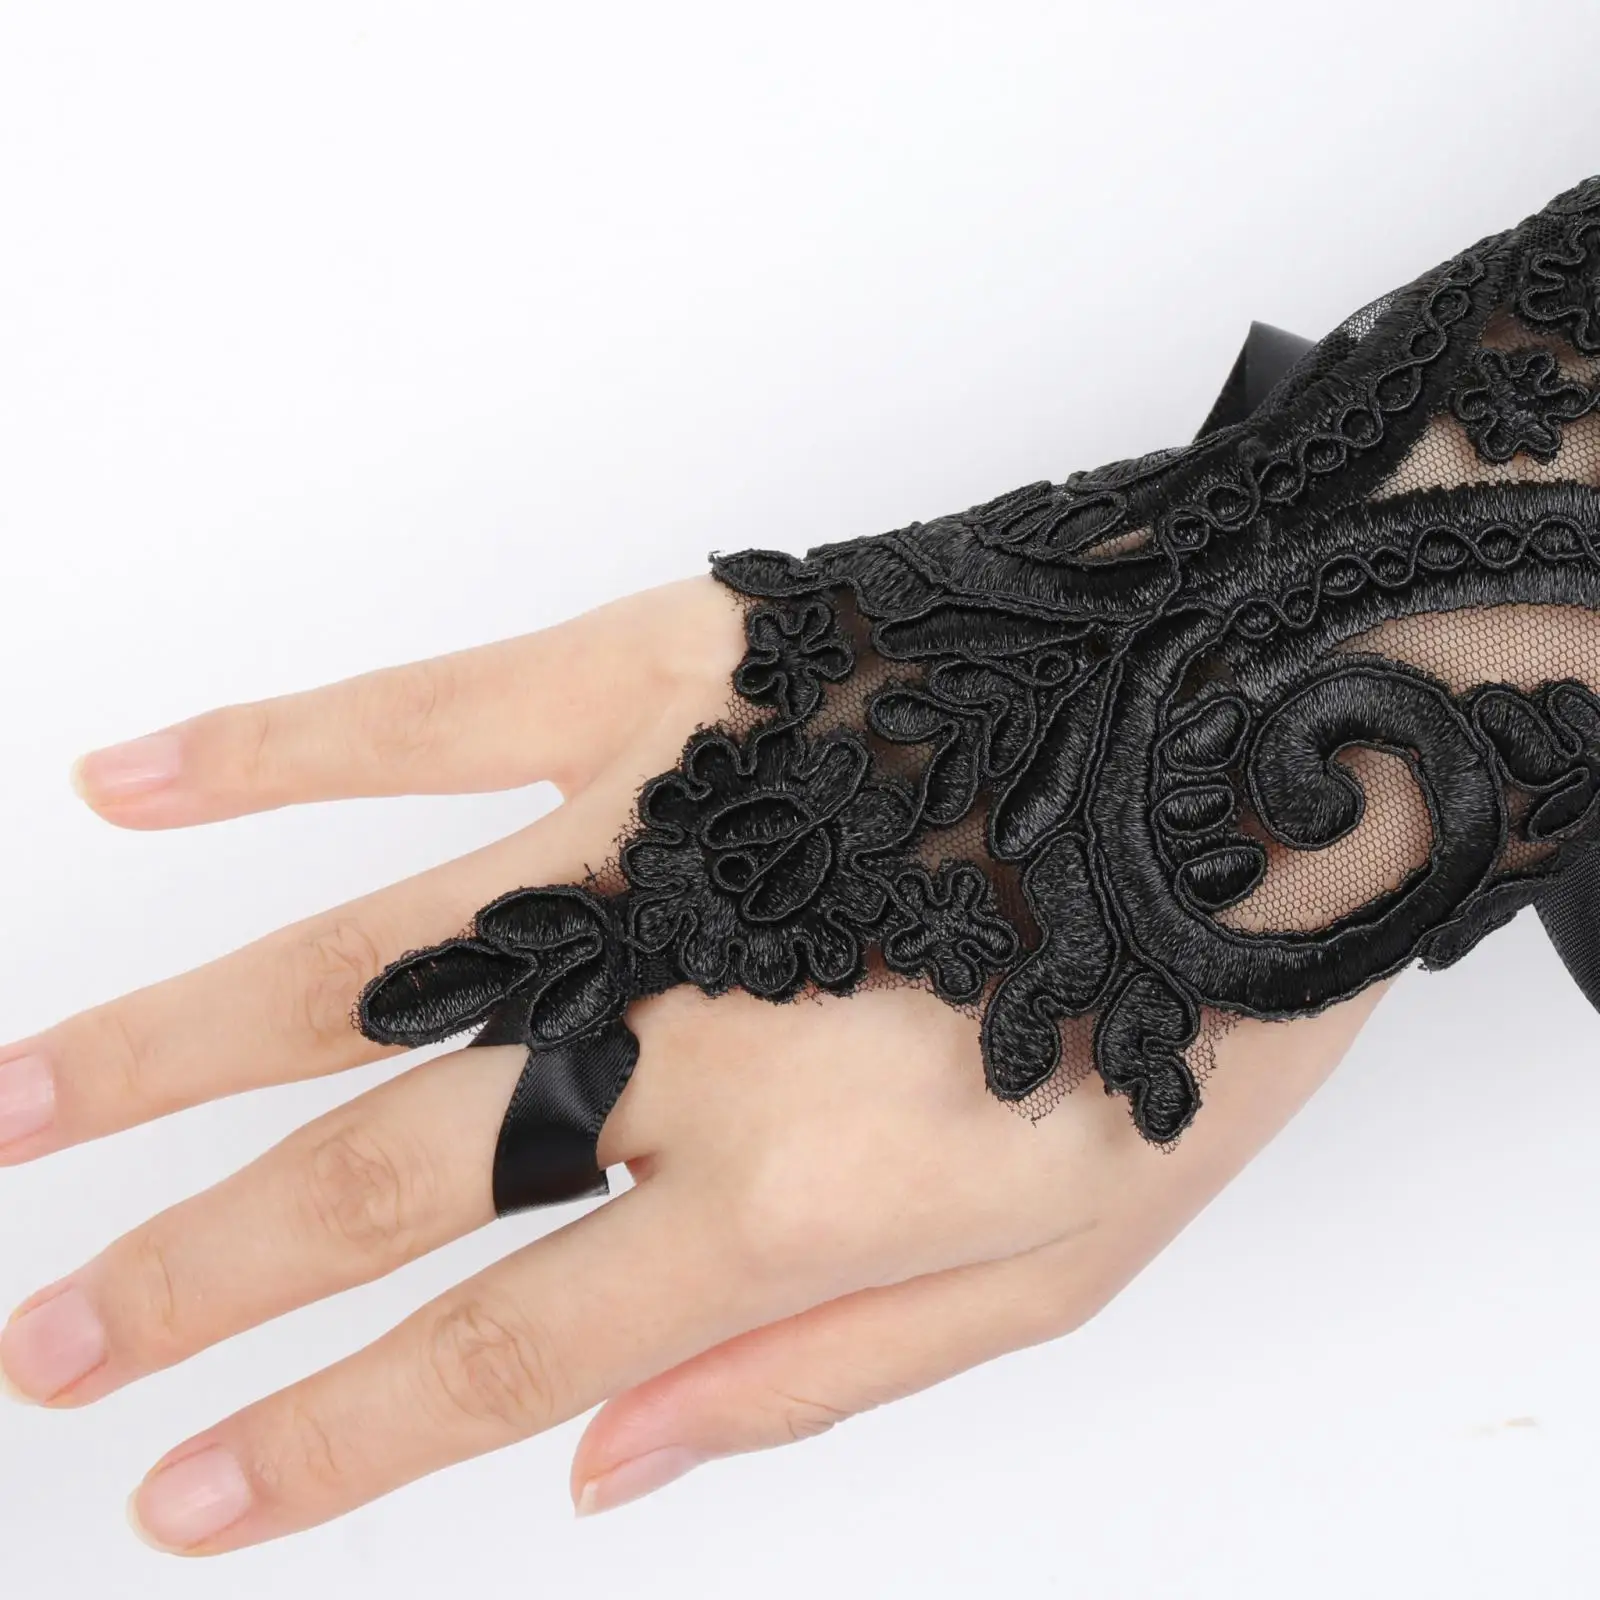 Black Faux Feather Artificial Feather Cuffs Gloves Lace Gloves Cuffs Fingerless Mittens for Stage Performance Show Party Costume